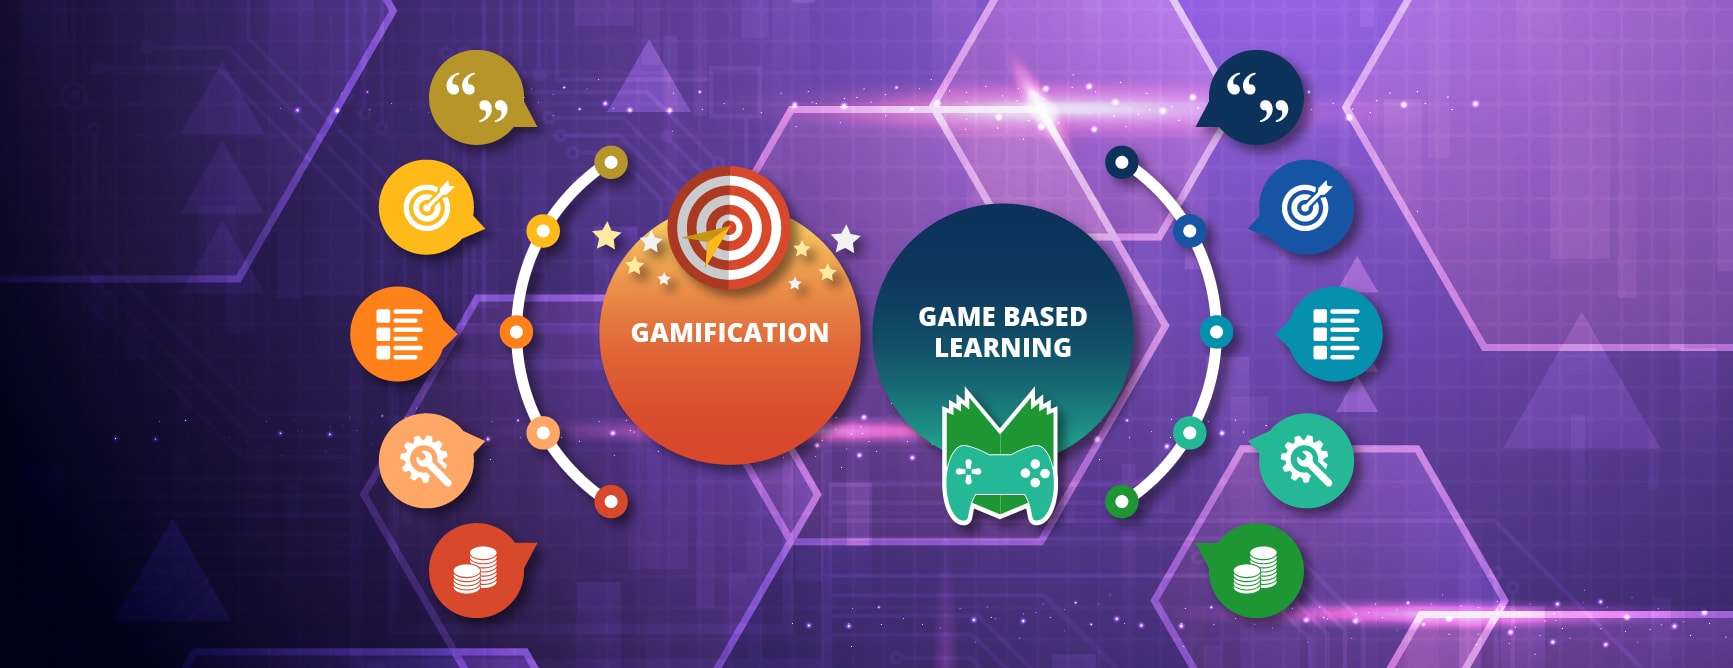 Gamification e Game Based Learning